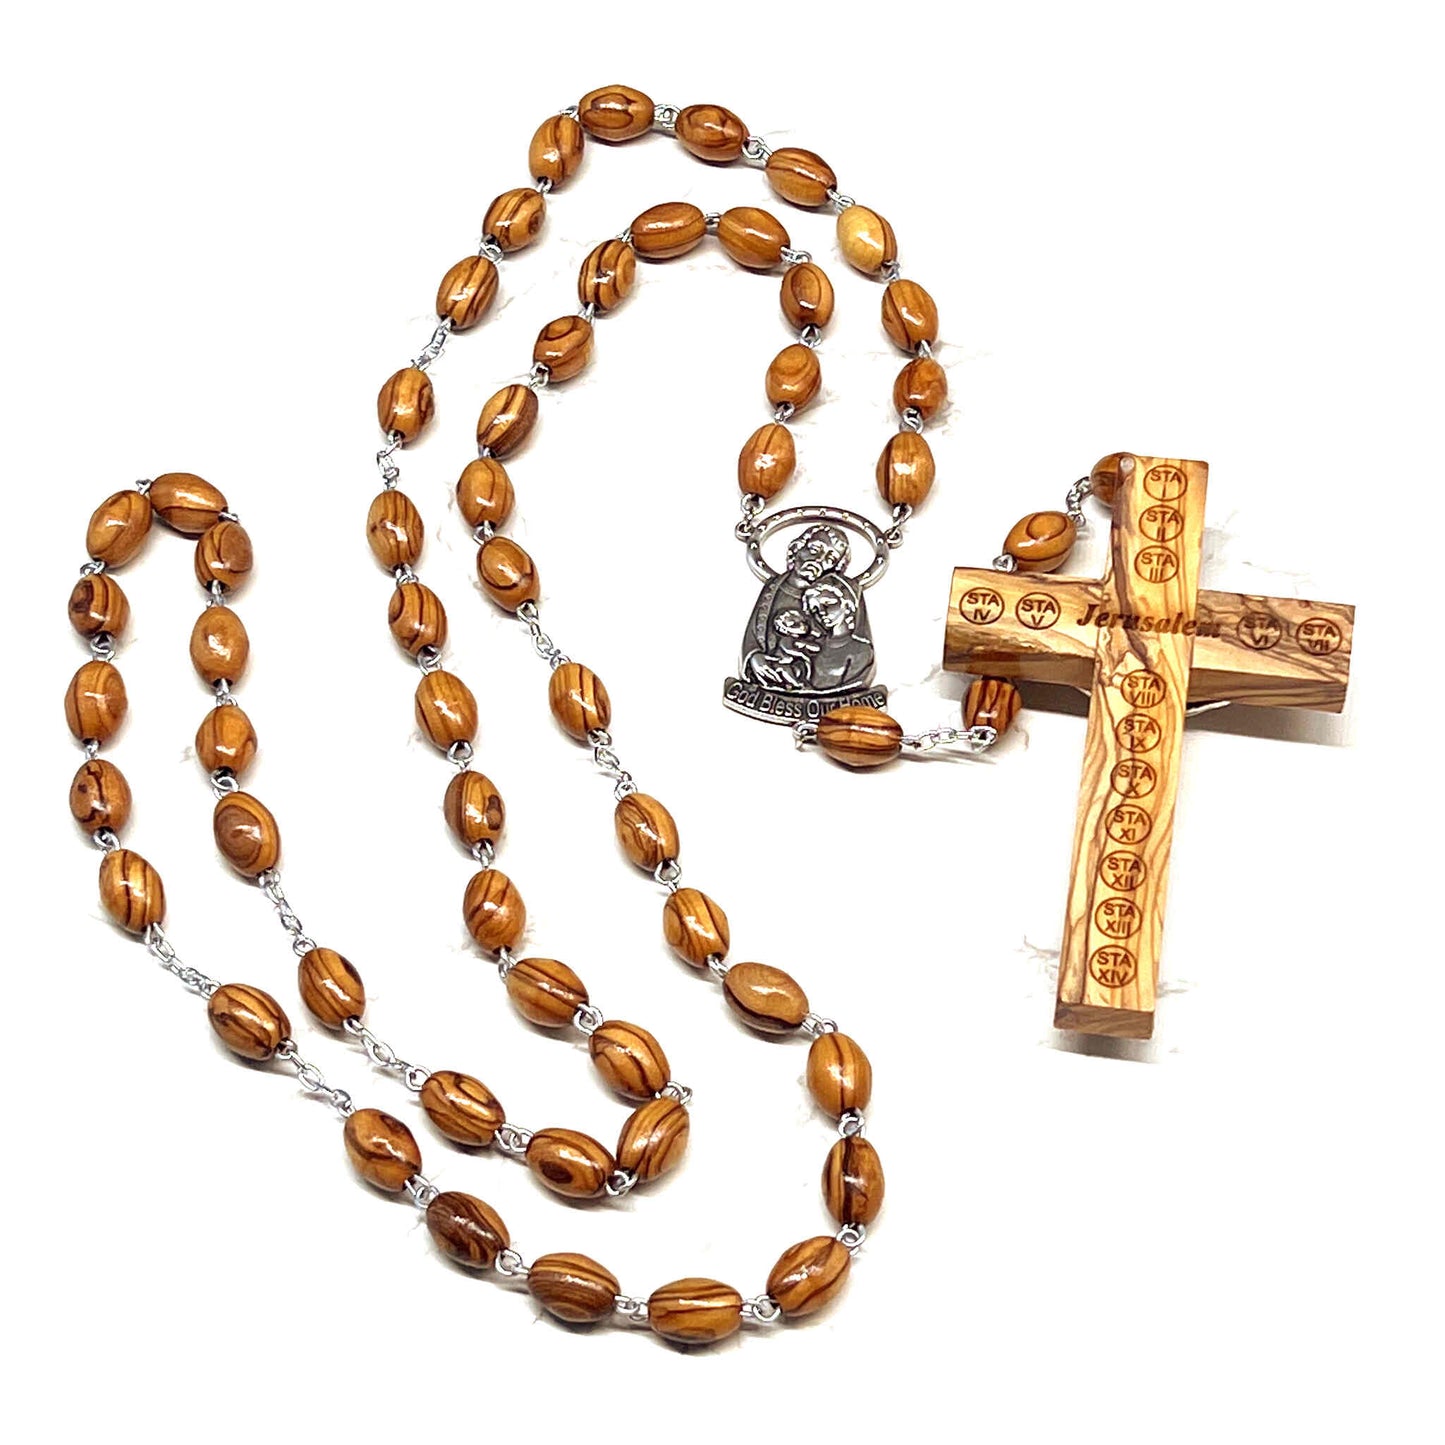 Wall Hanging Rosary, "God Bless Our Home" as Centerpiece, Large Wooden Beads from Bethlehem